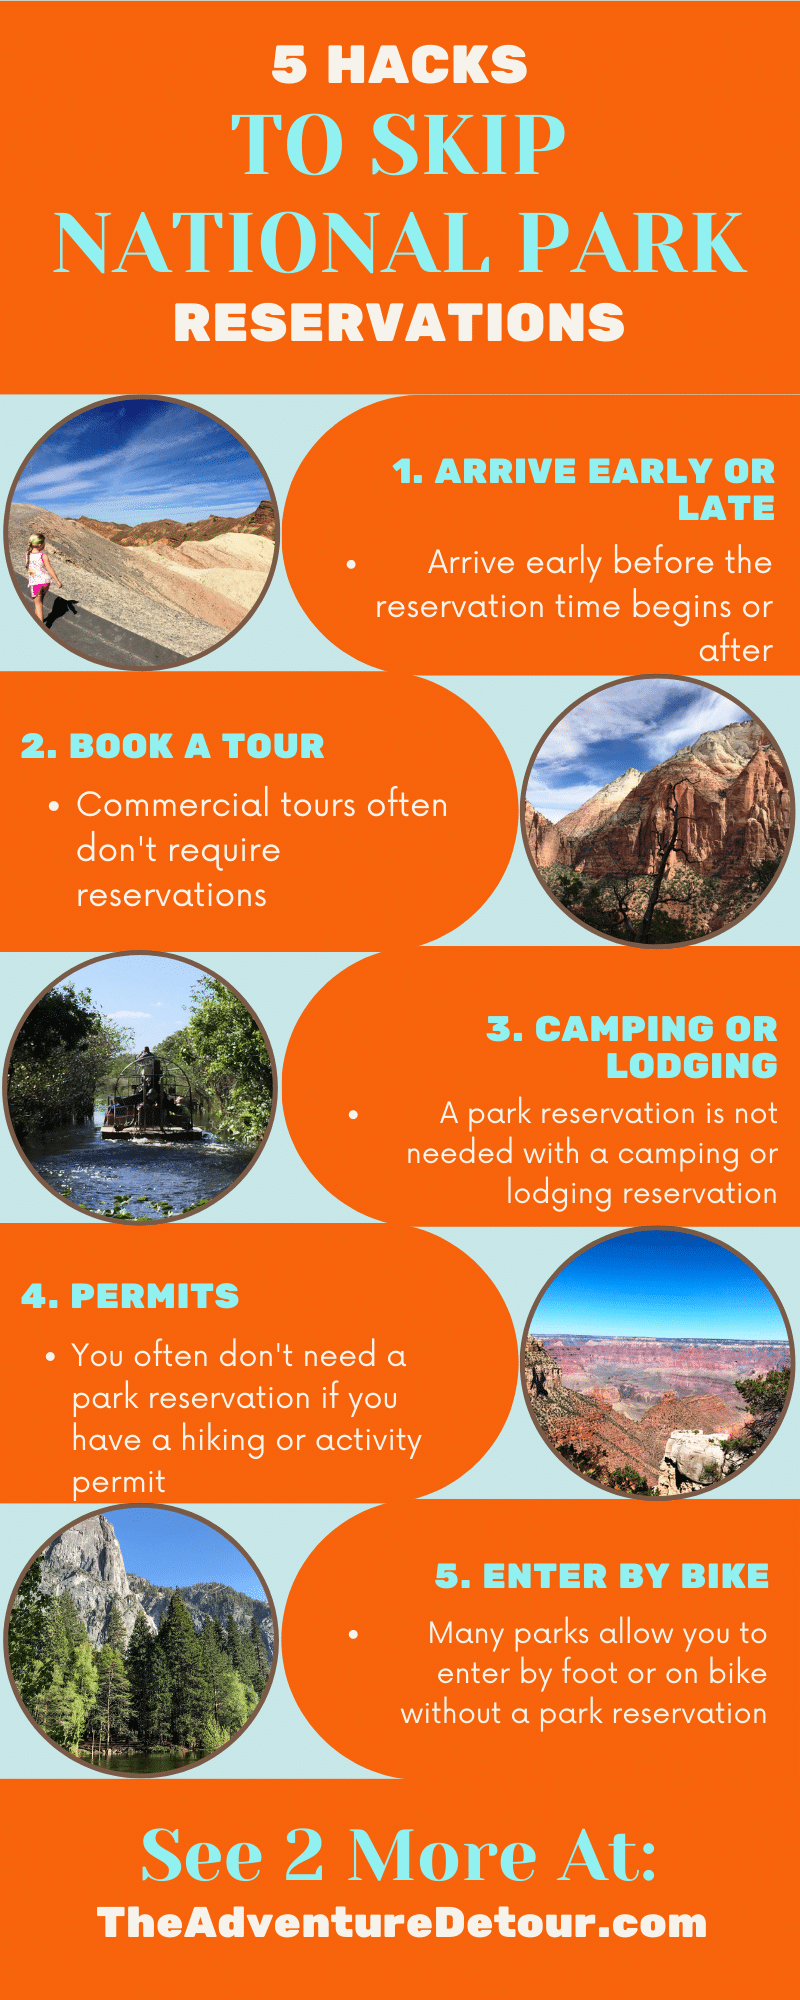 Graphic showing 5 ways to skip national park reservations.